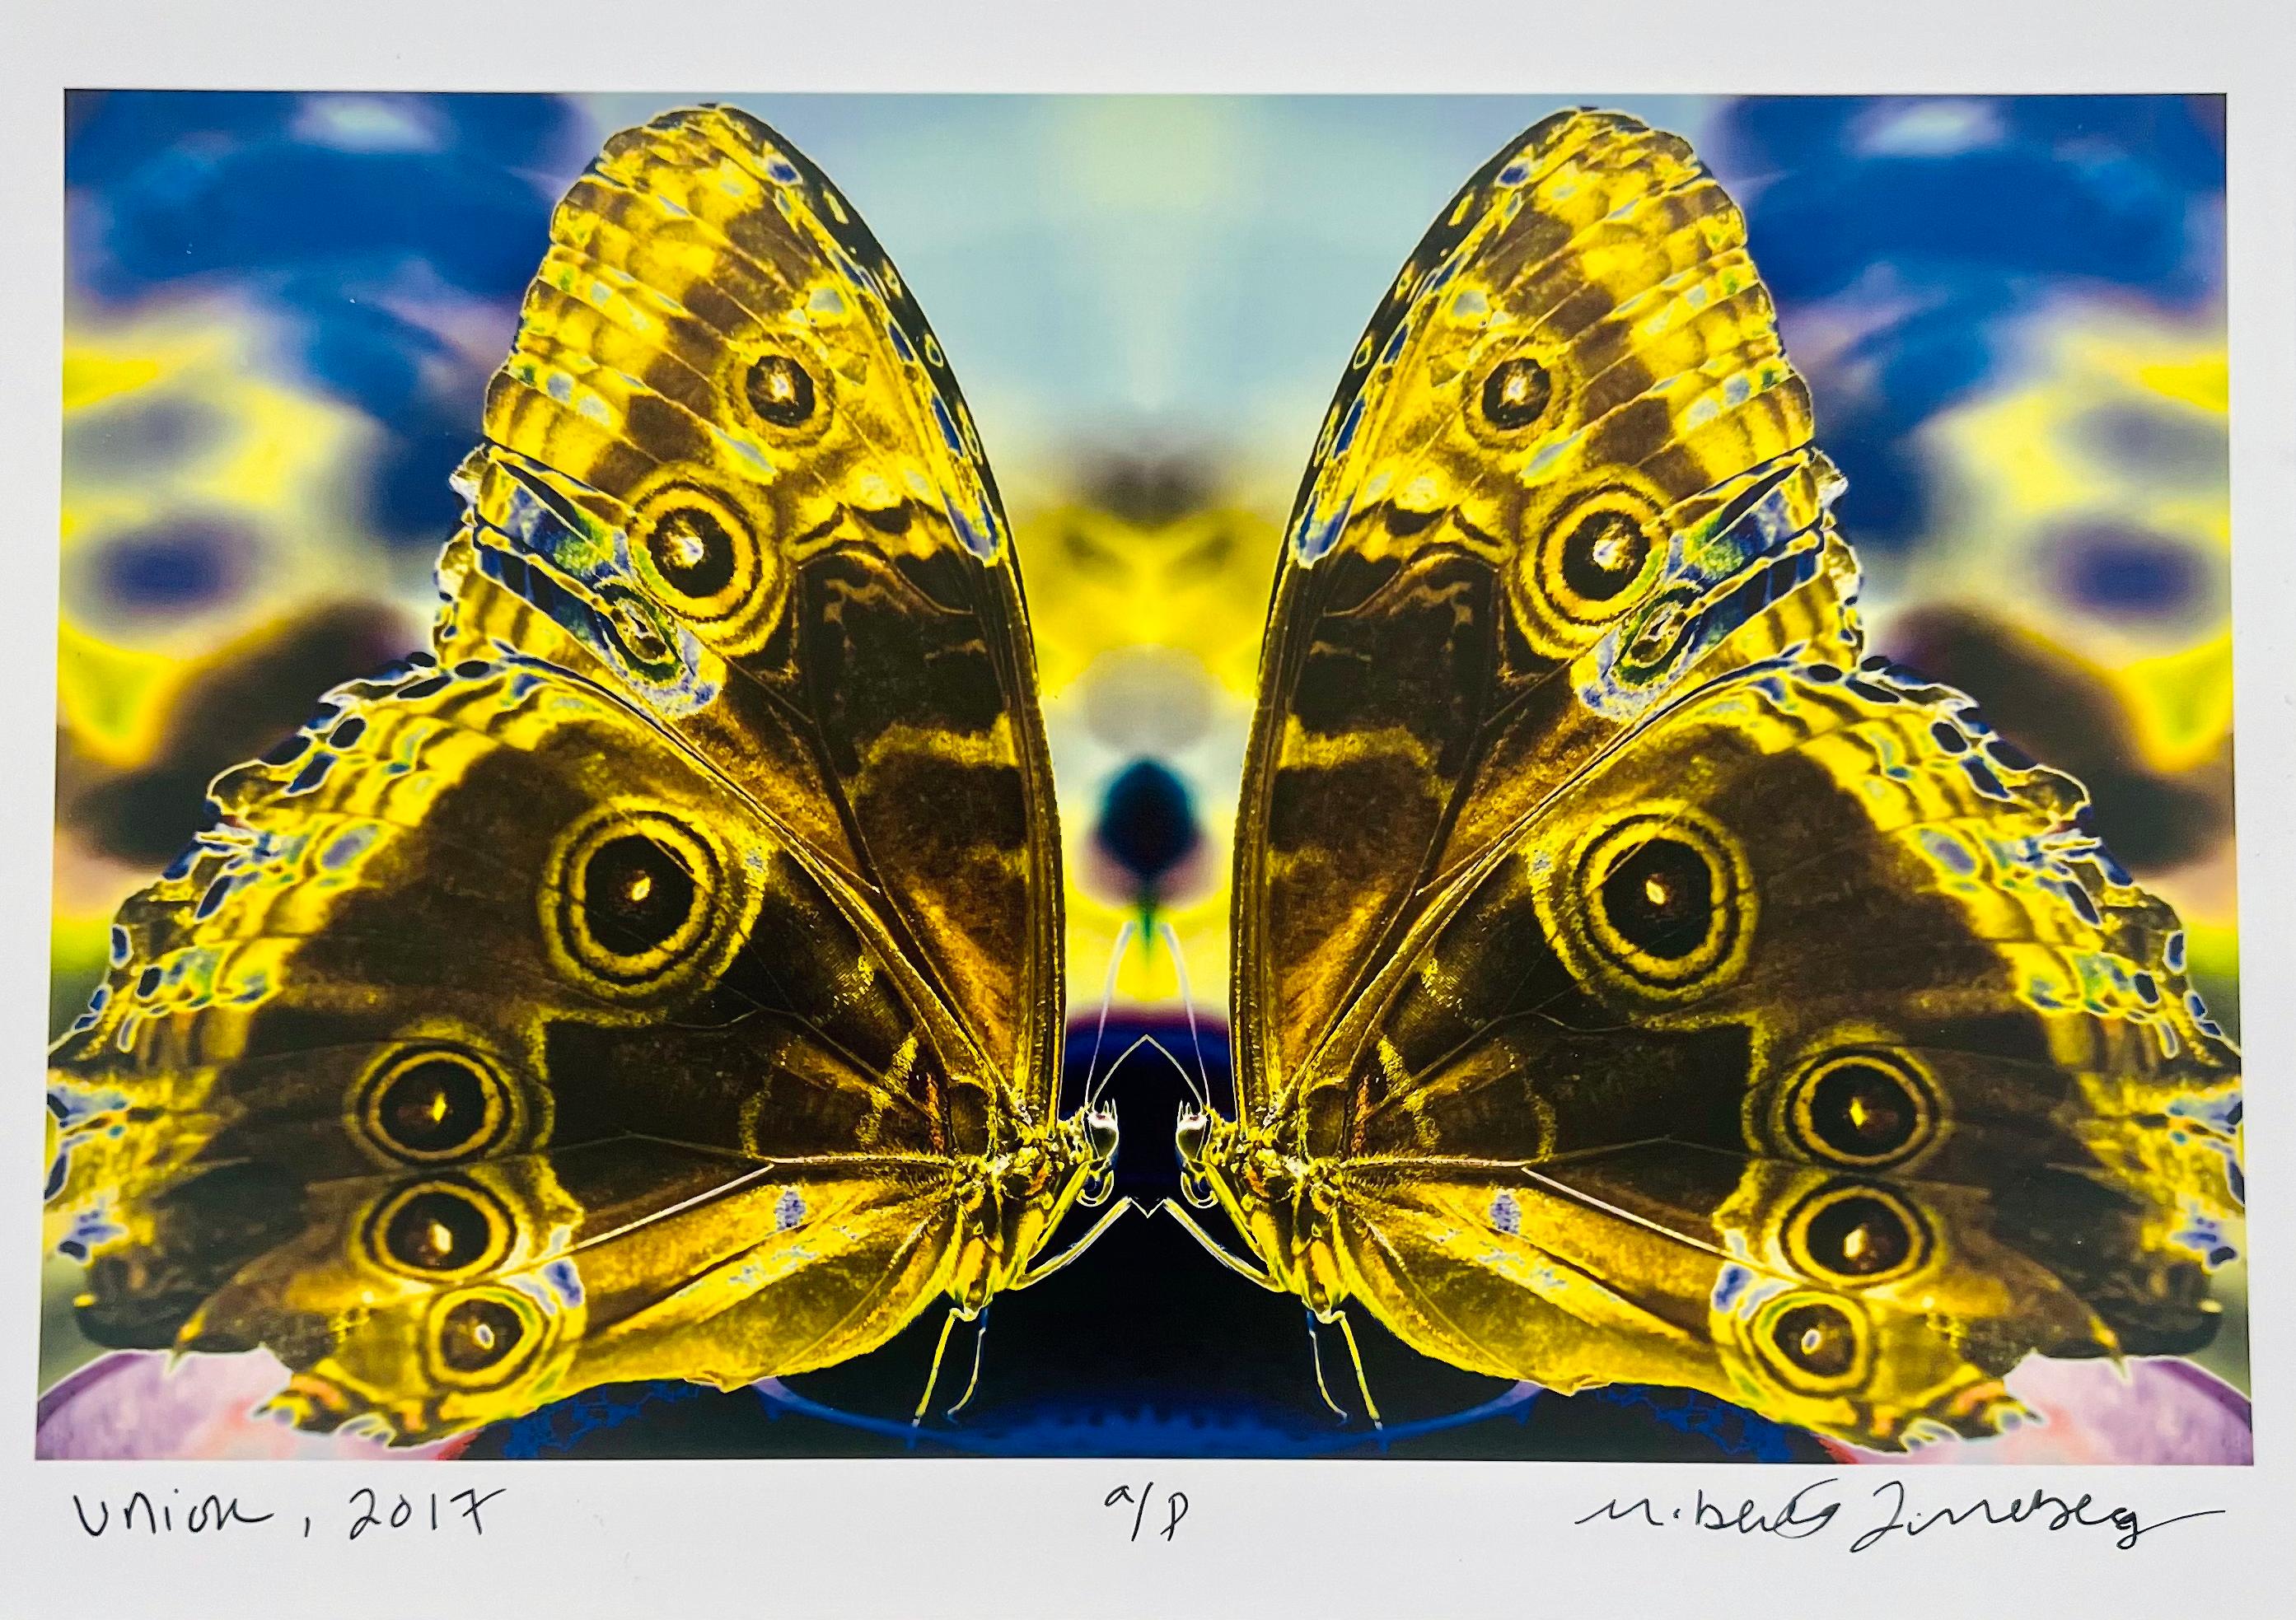 Union, Color Photograph of Butterfly Pair in Butterflies Series